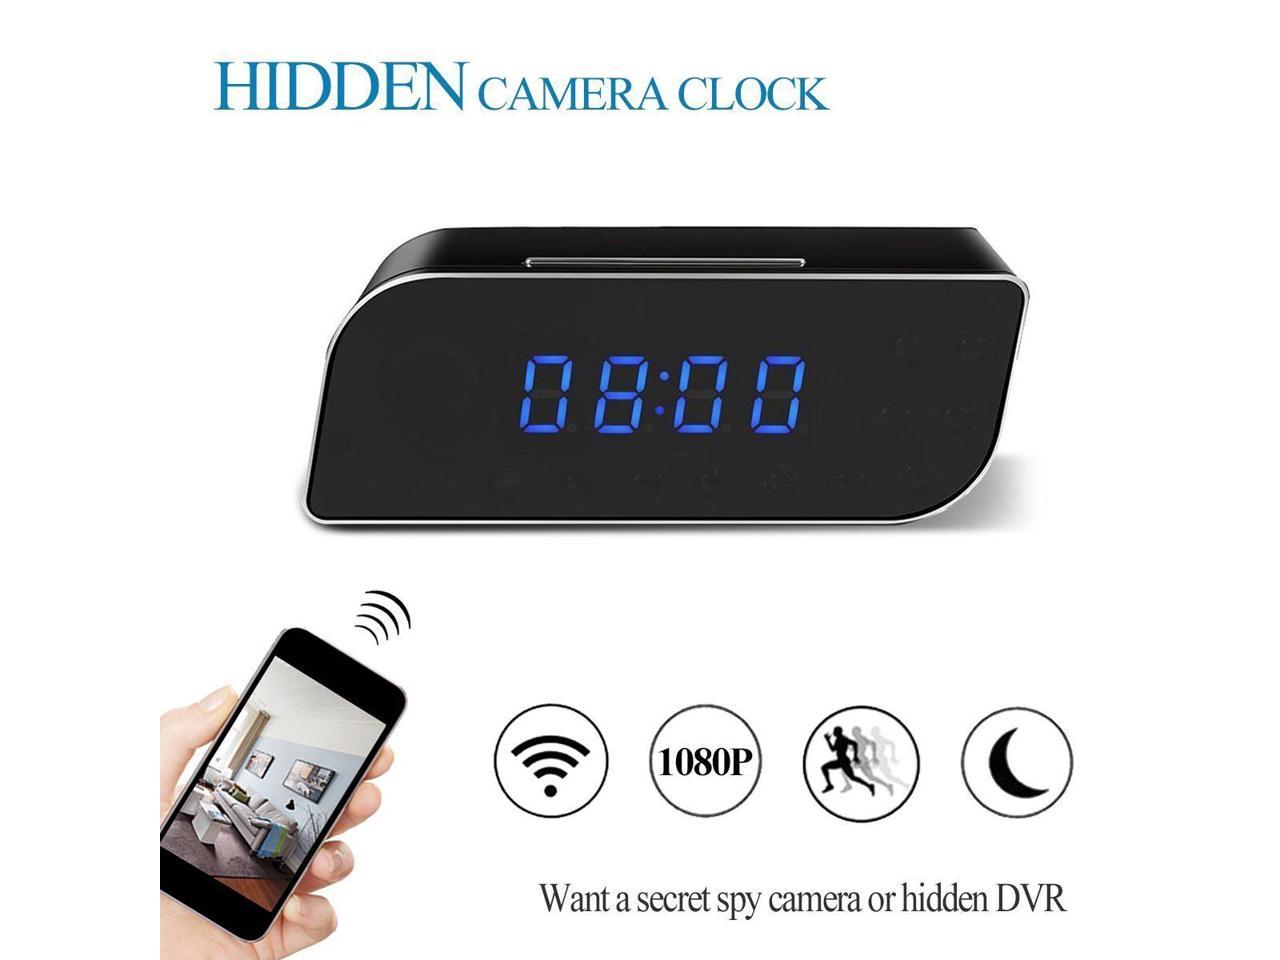 Victor Machu Picchu Geplooid WIFI Hidden Camera Spy Camera Alarm Clock HD 1080P Wireless Mini Video  Recorder with Motion Detection and Night Vision, Nanny Cam for Home  Security Surveillance for IOS Android Windows - Newegg.com